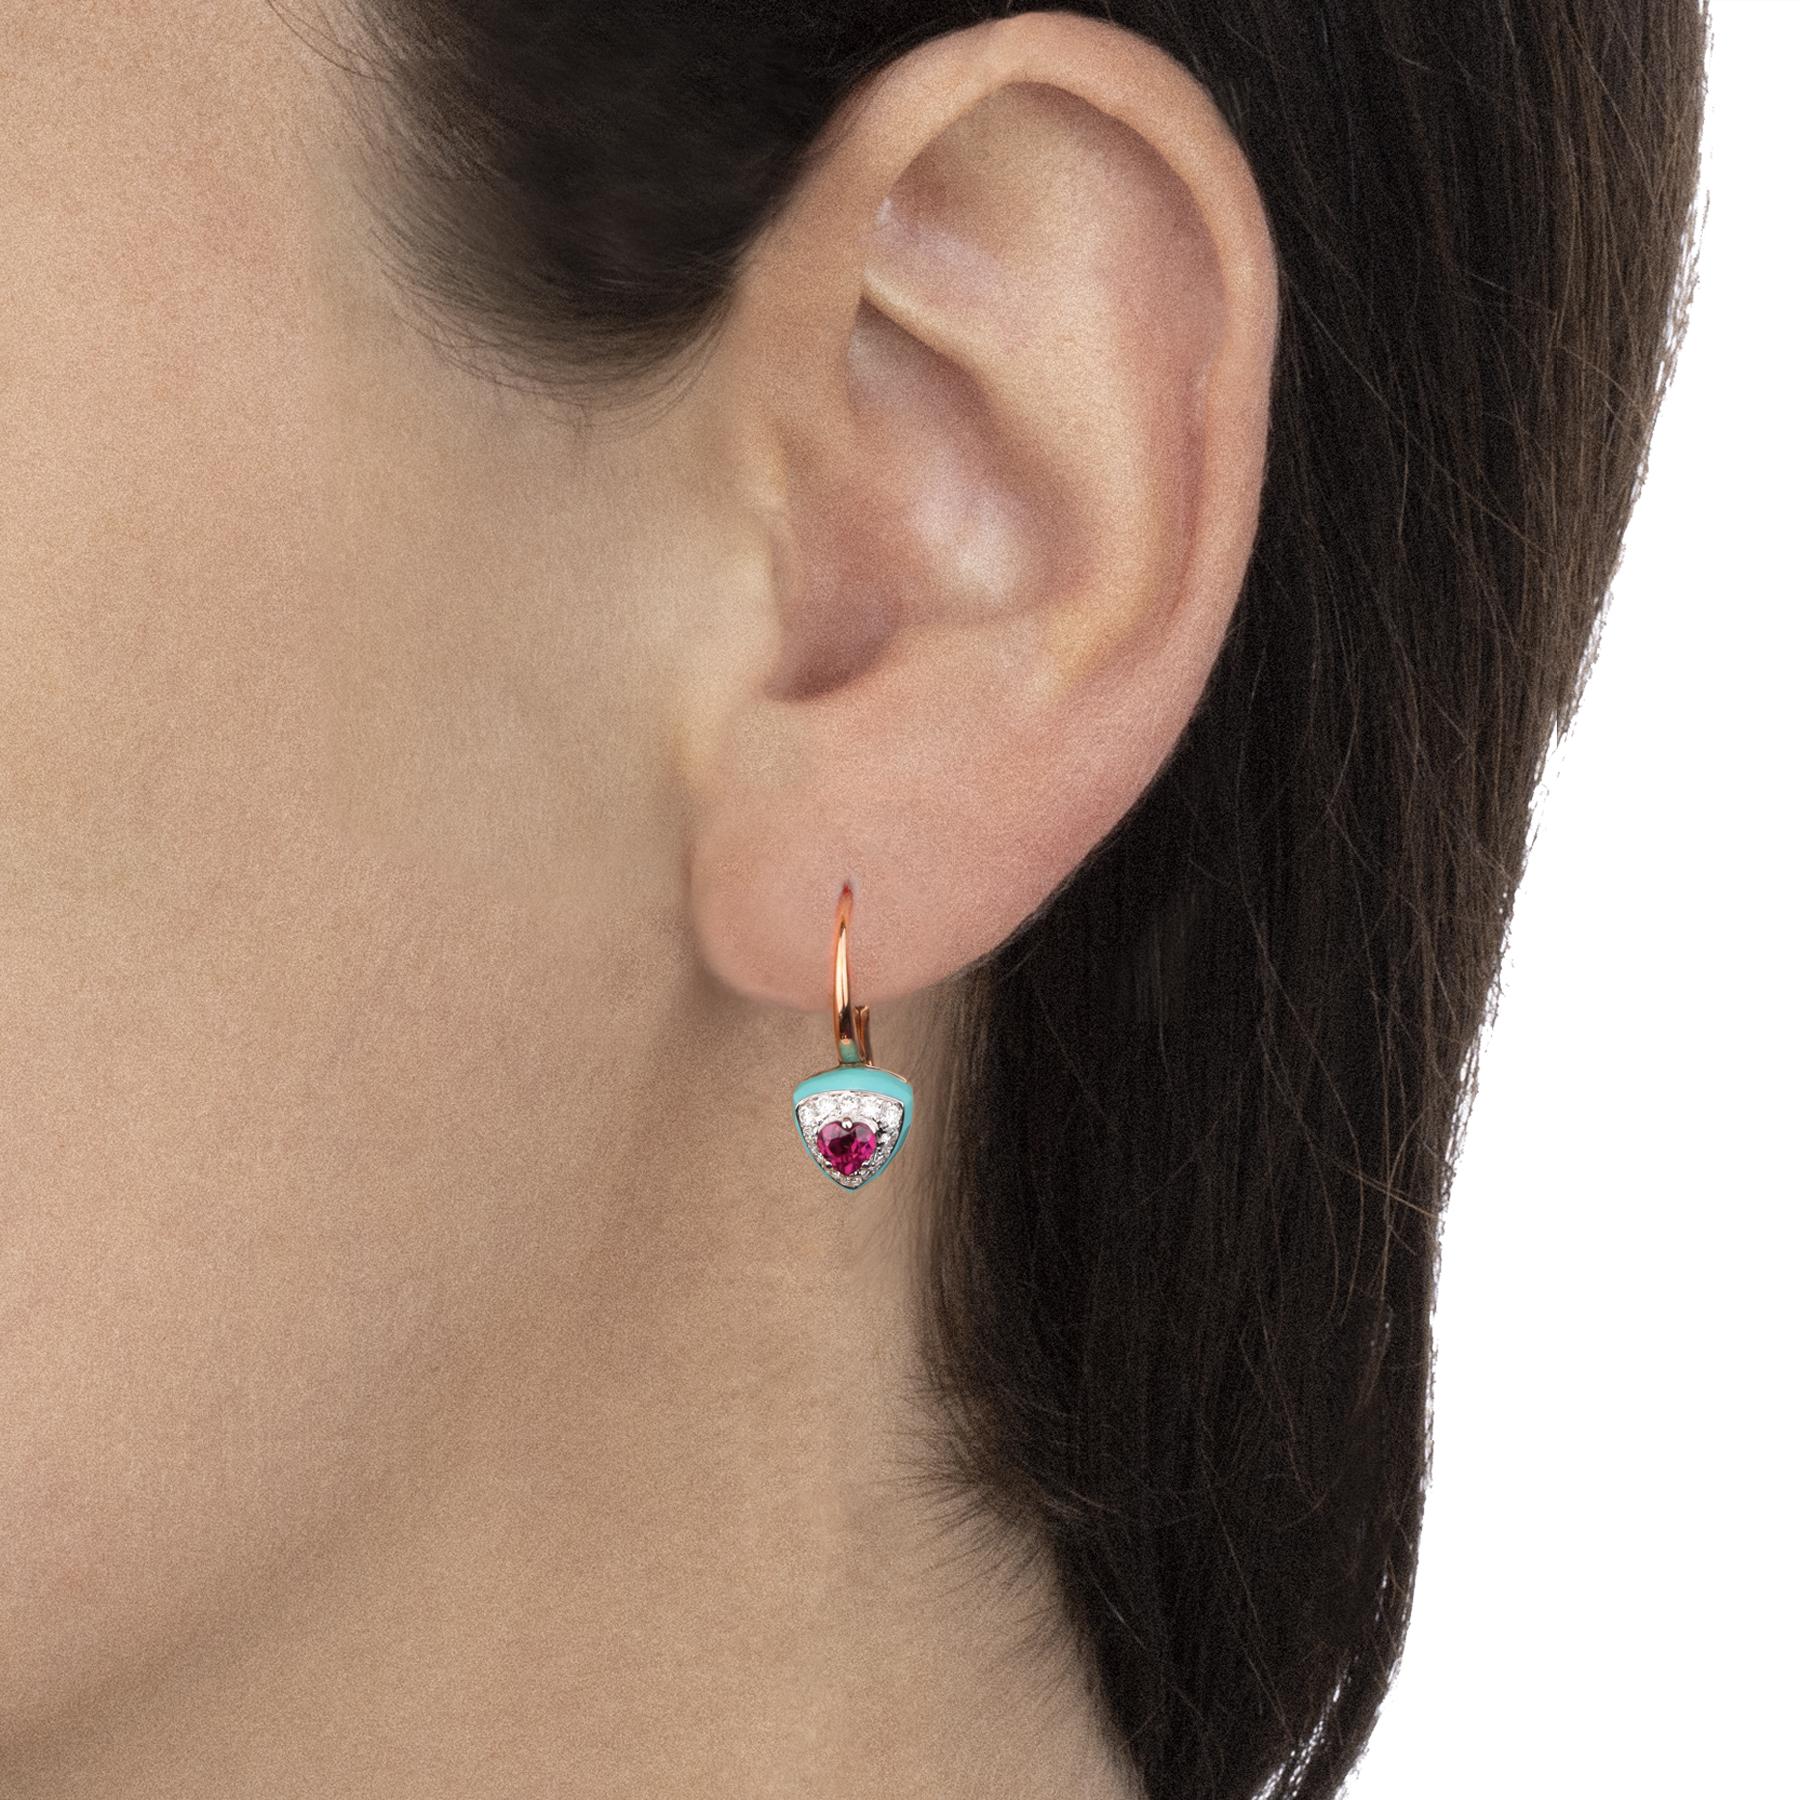 Precious rose gold earrings characterized by intense and fresh colors. A playful harmony of colored stones and shiny diamonds for a contemporary design.

Cast rose gold earrings, triangle cut turquoise 4.10 ct, diamonds pavé of 0.38 ct on white gold